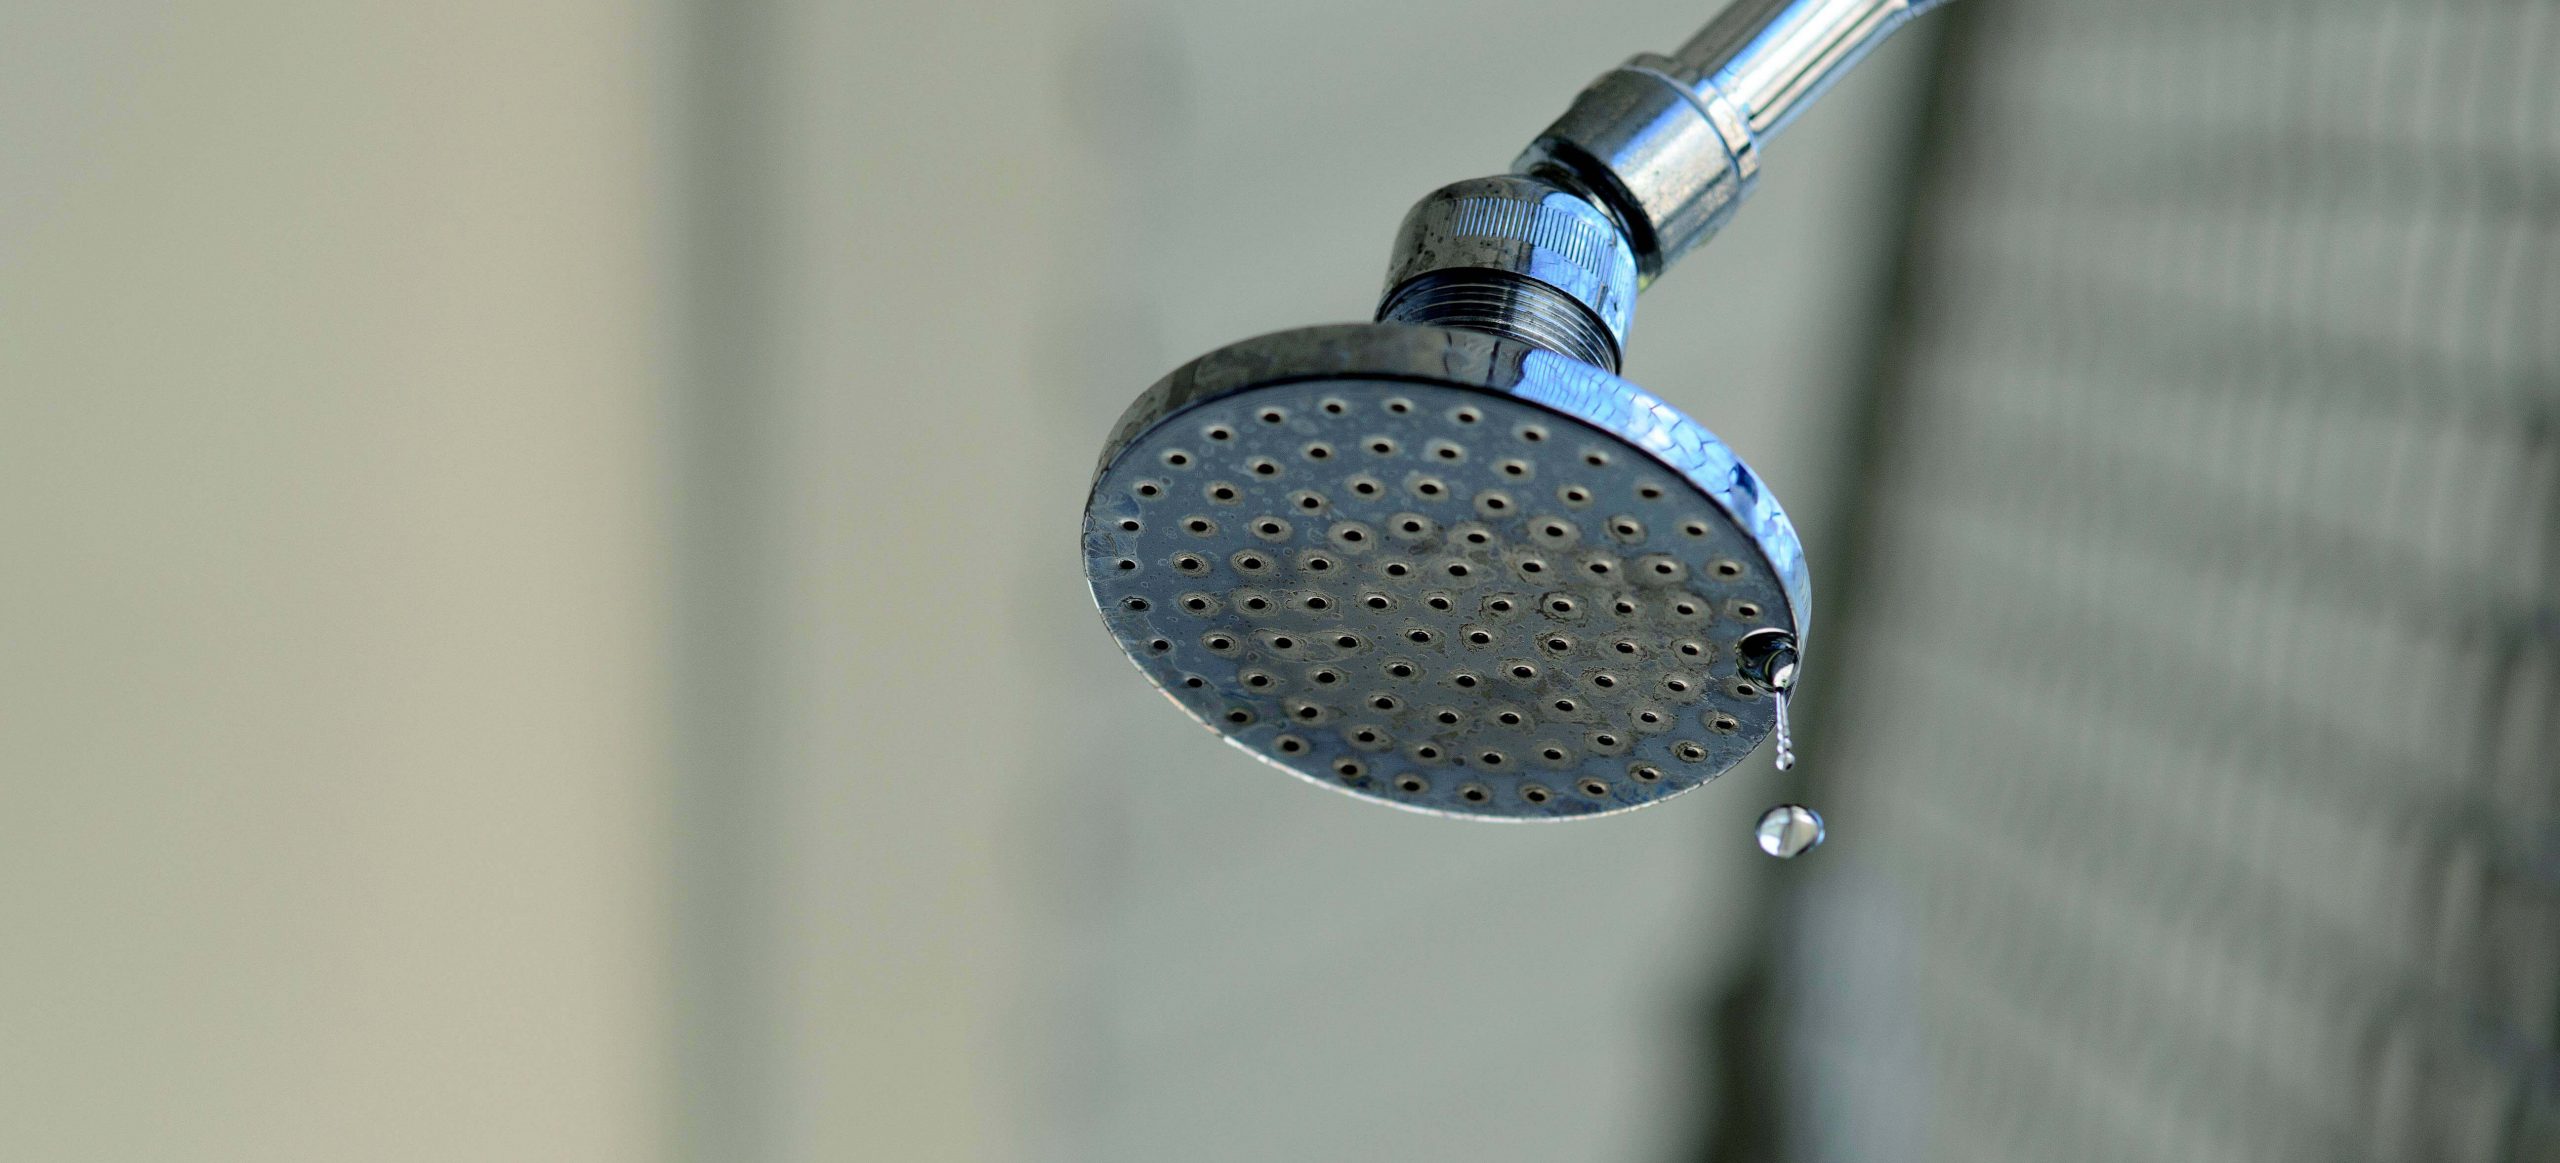 Leaking Shower - 26 Causes and Solutions  My Plumber